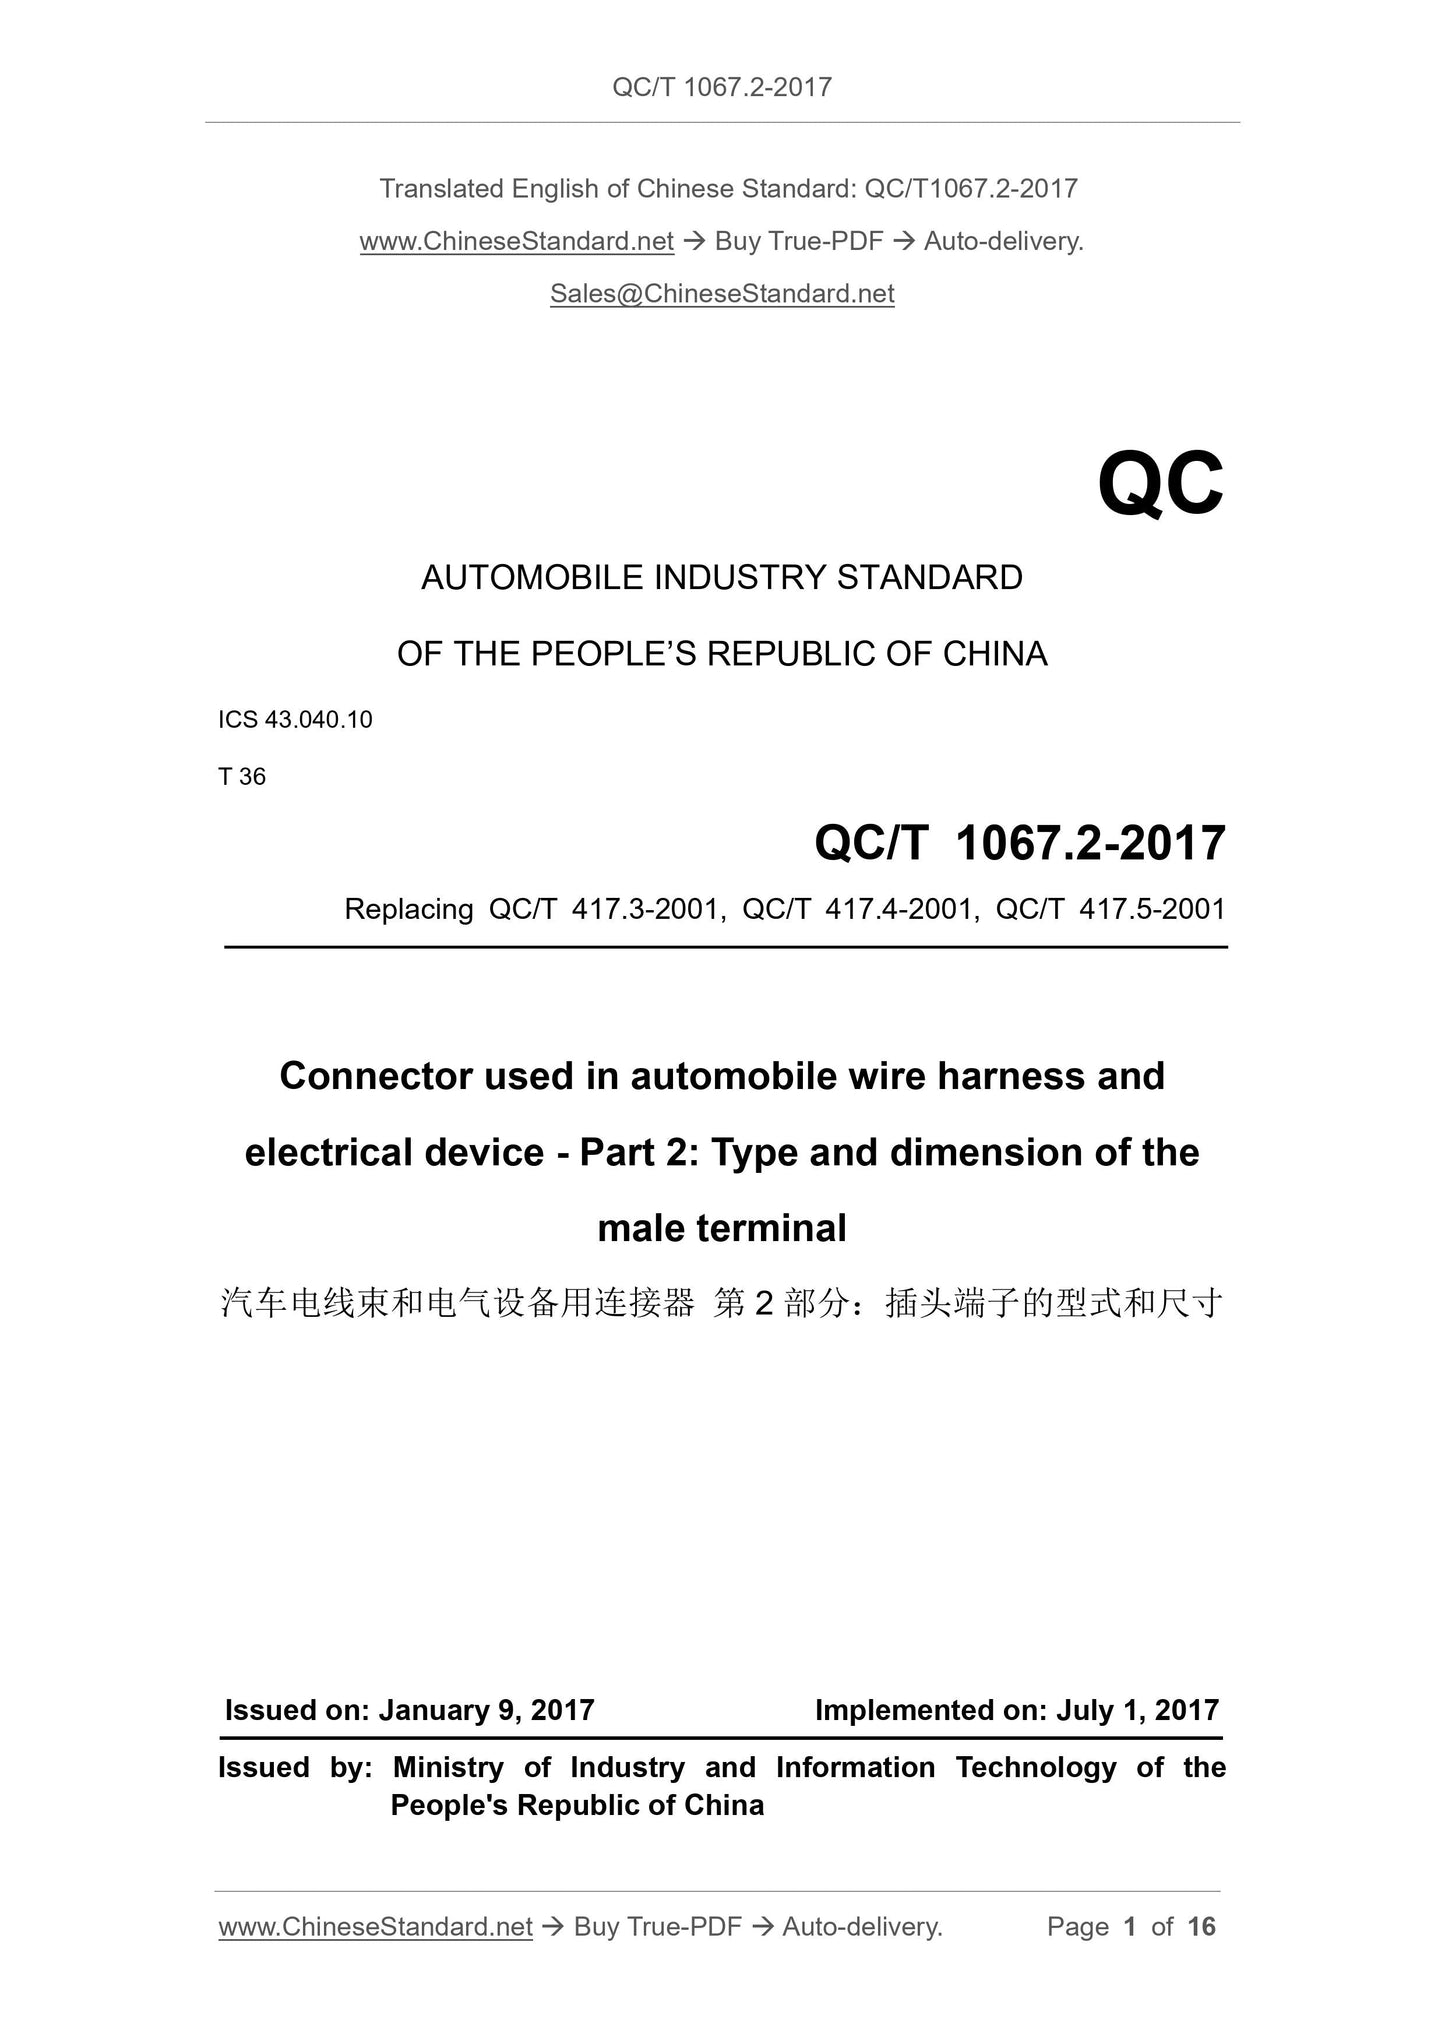 QC/T 1067.2-2017 Page 1